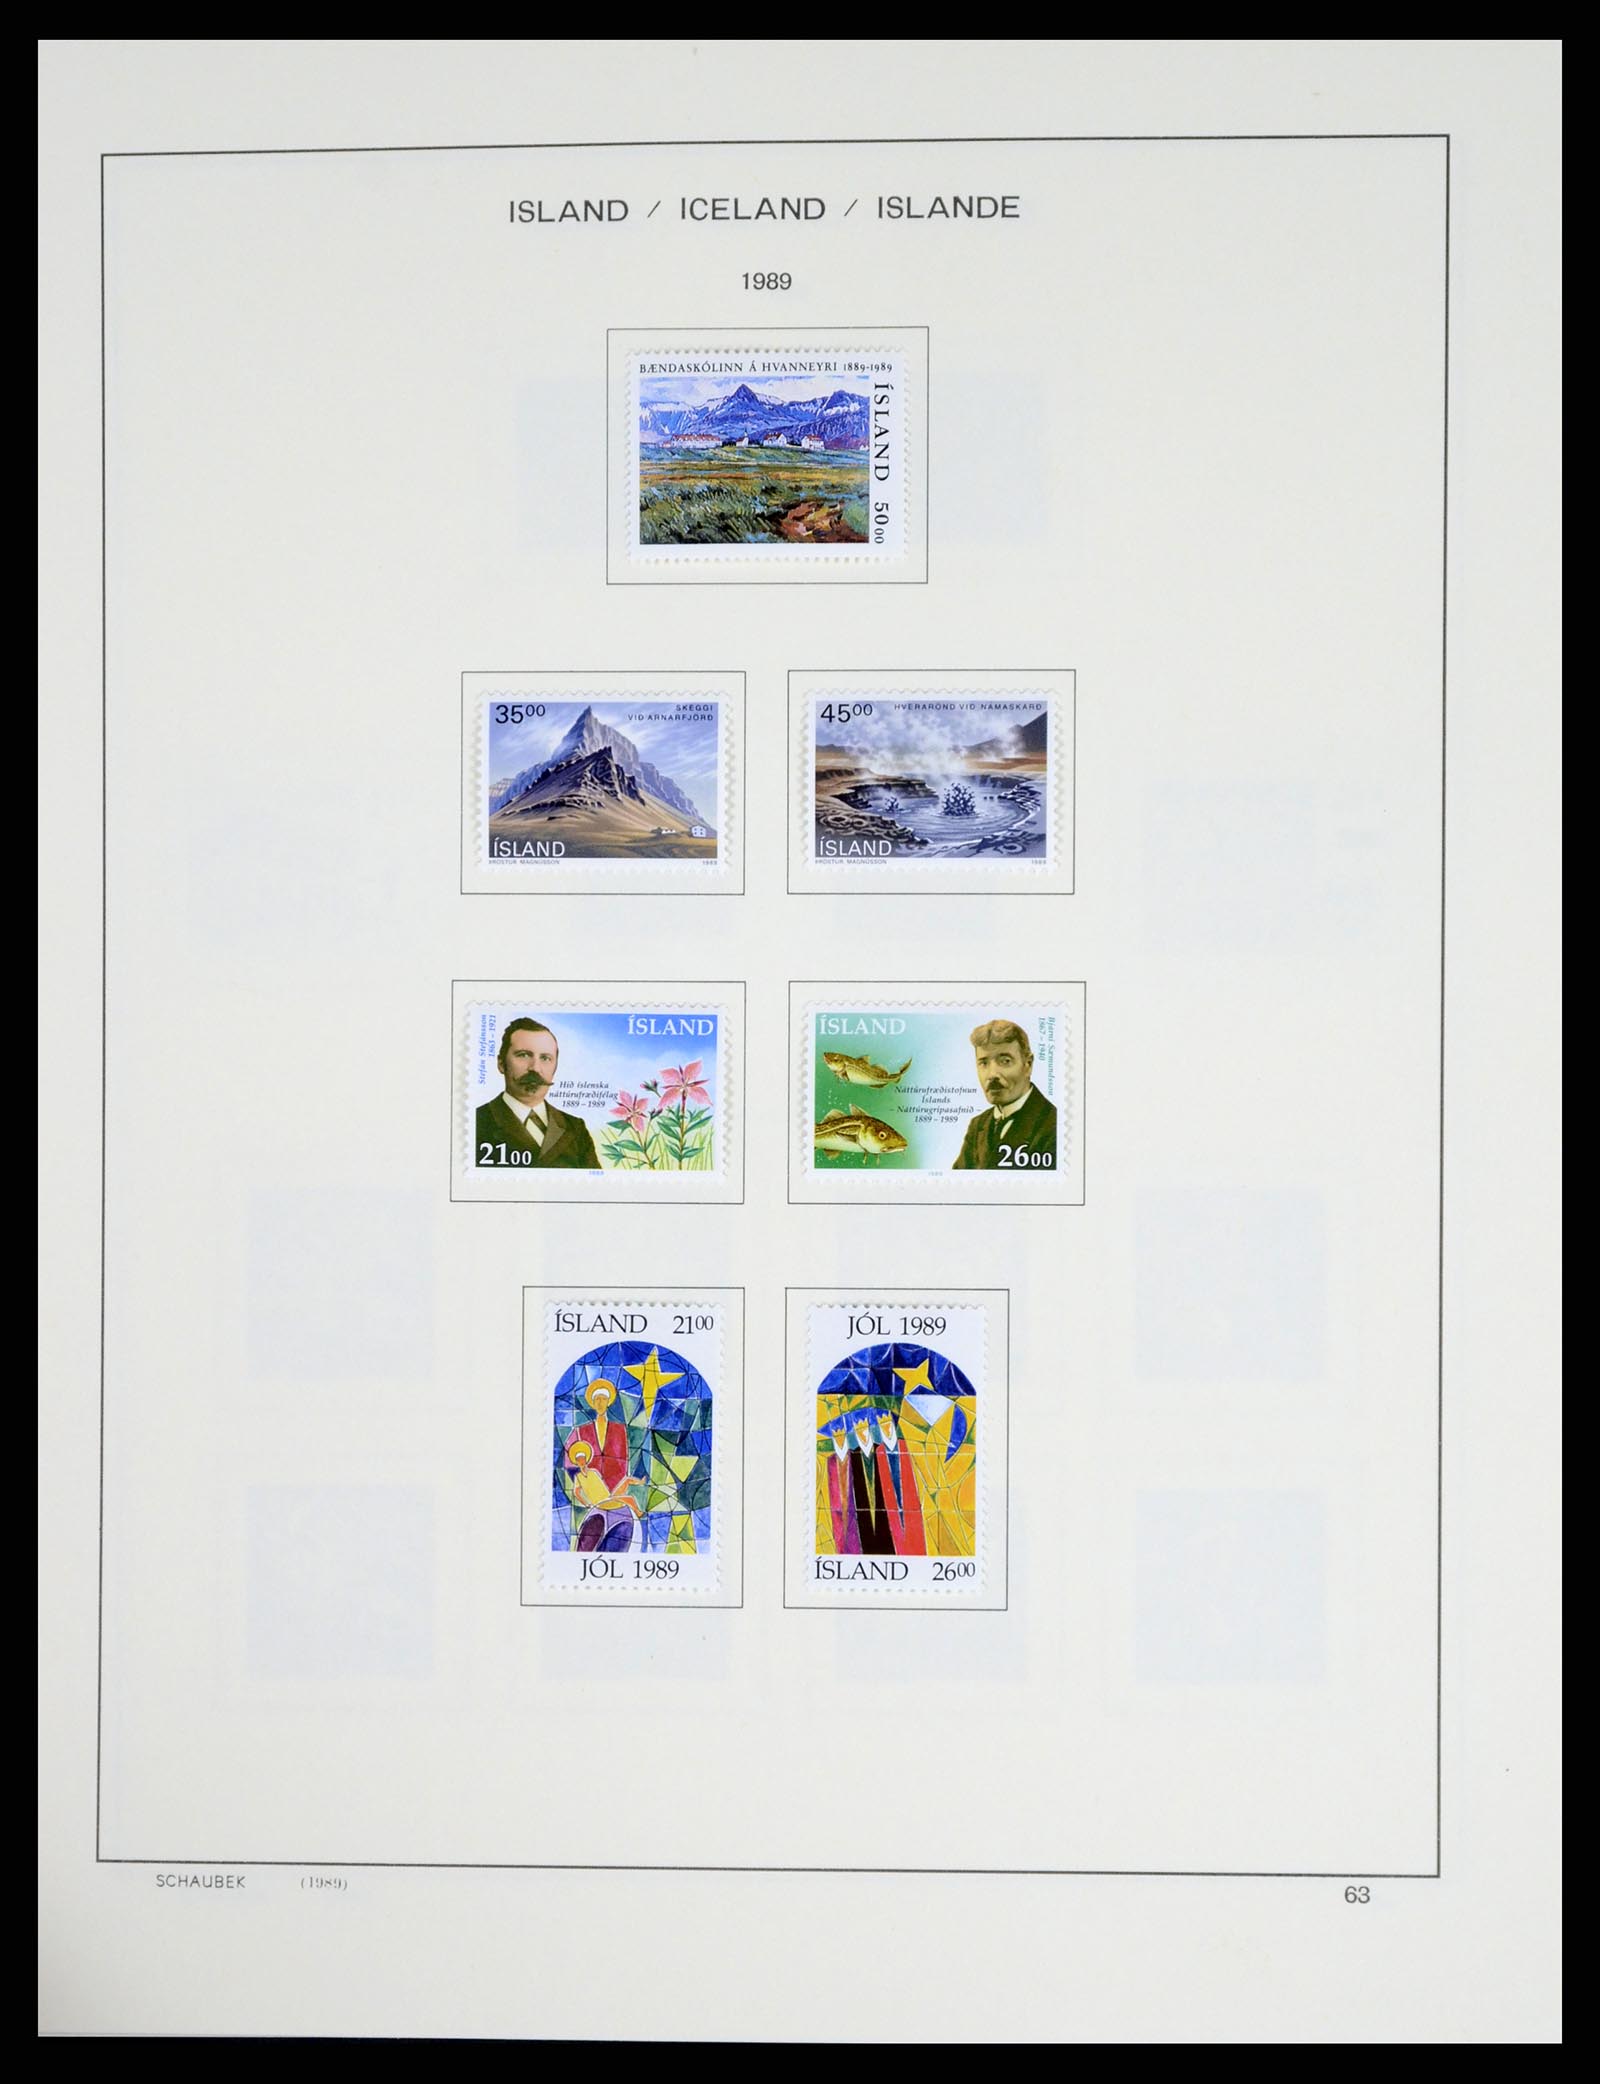 37555 072 - Stamp collection 37555 Iceland 1873-2010.